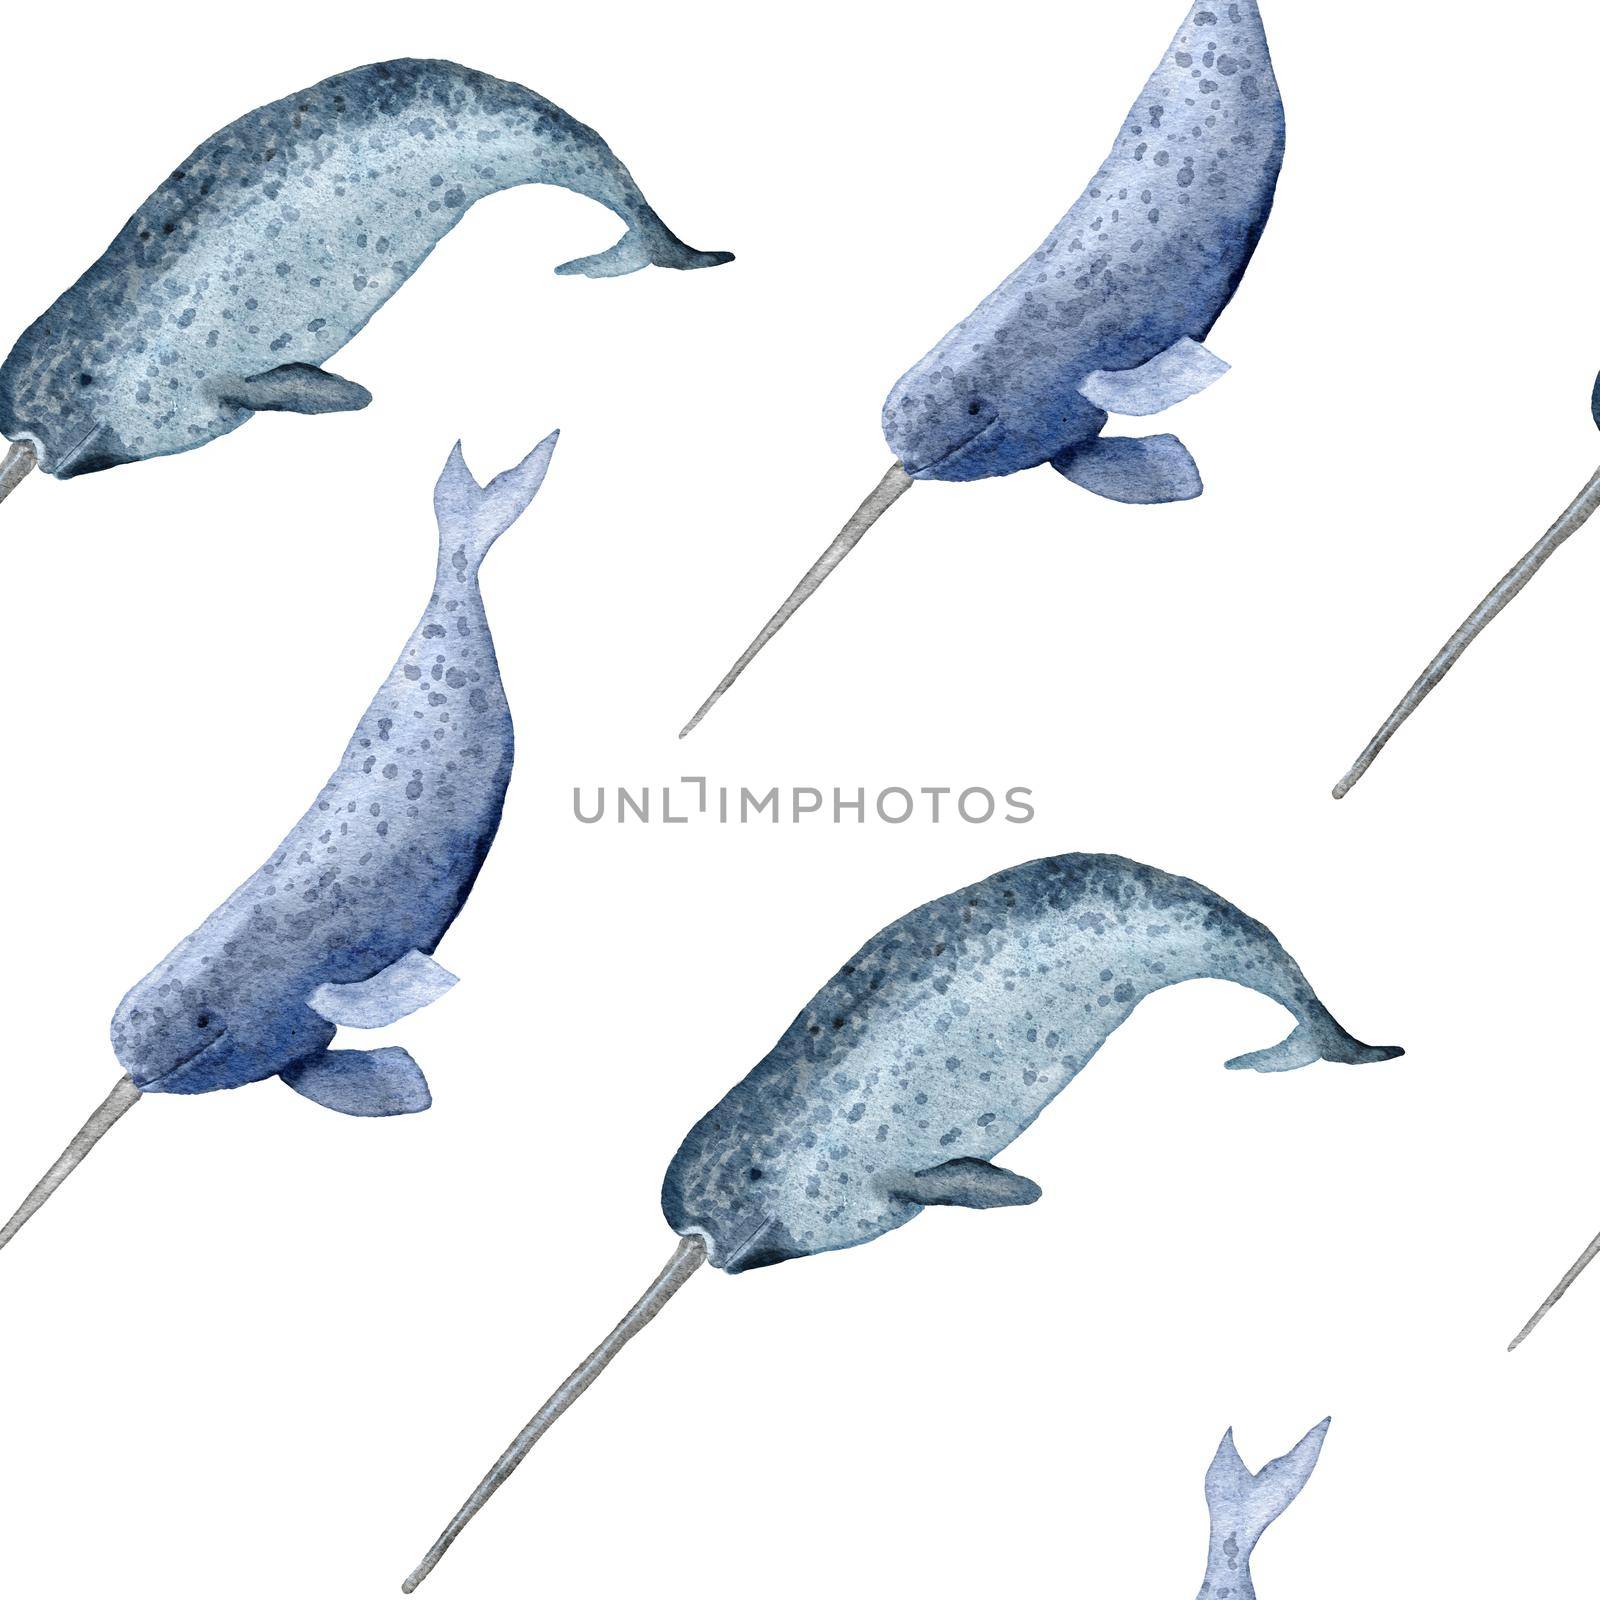 Hand drawn watercolor seamless pattern with narwhal. Sea ocean marine animal, nautical underwater endangered mammal species. Blue gray illustration for fabric nursery decor, under the sea prints